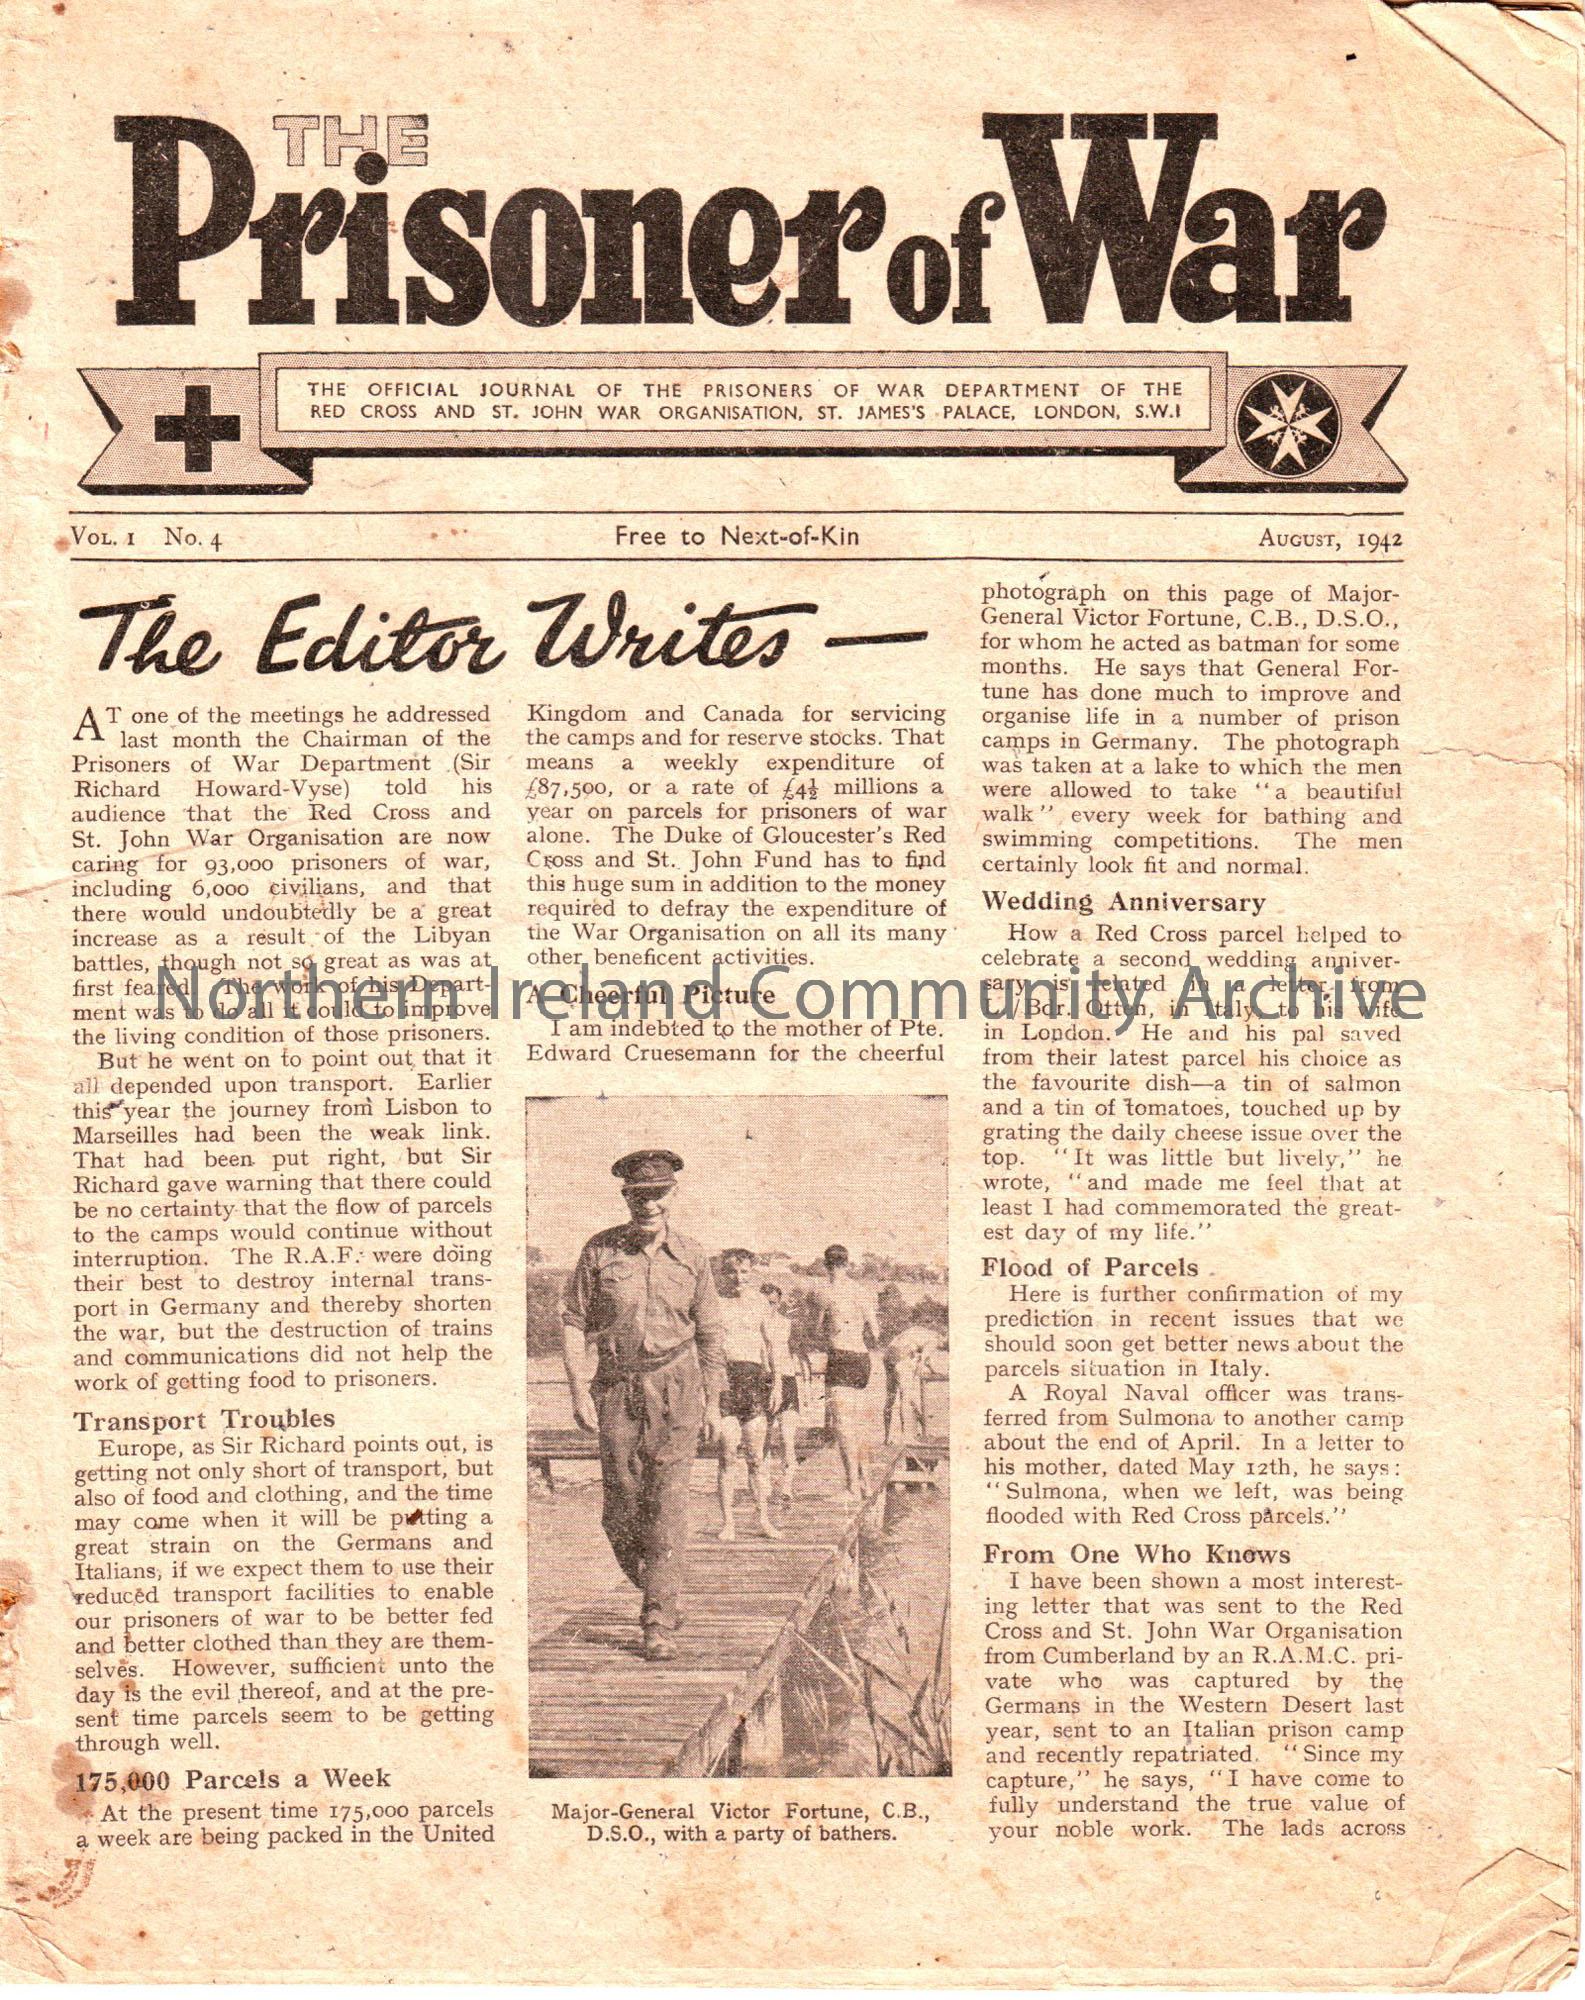 ‘The Prisoner of War’ The official journal of the prisoners of war… Vol.1 No.6 August, 1942. black and white, three pages folded